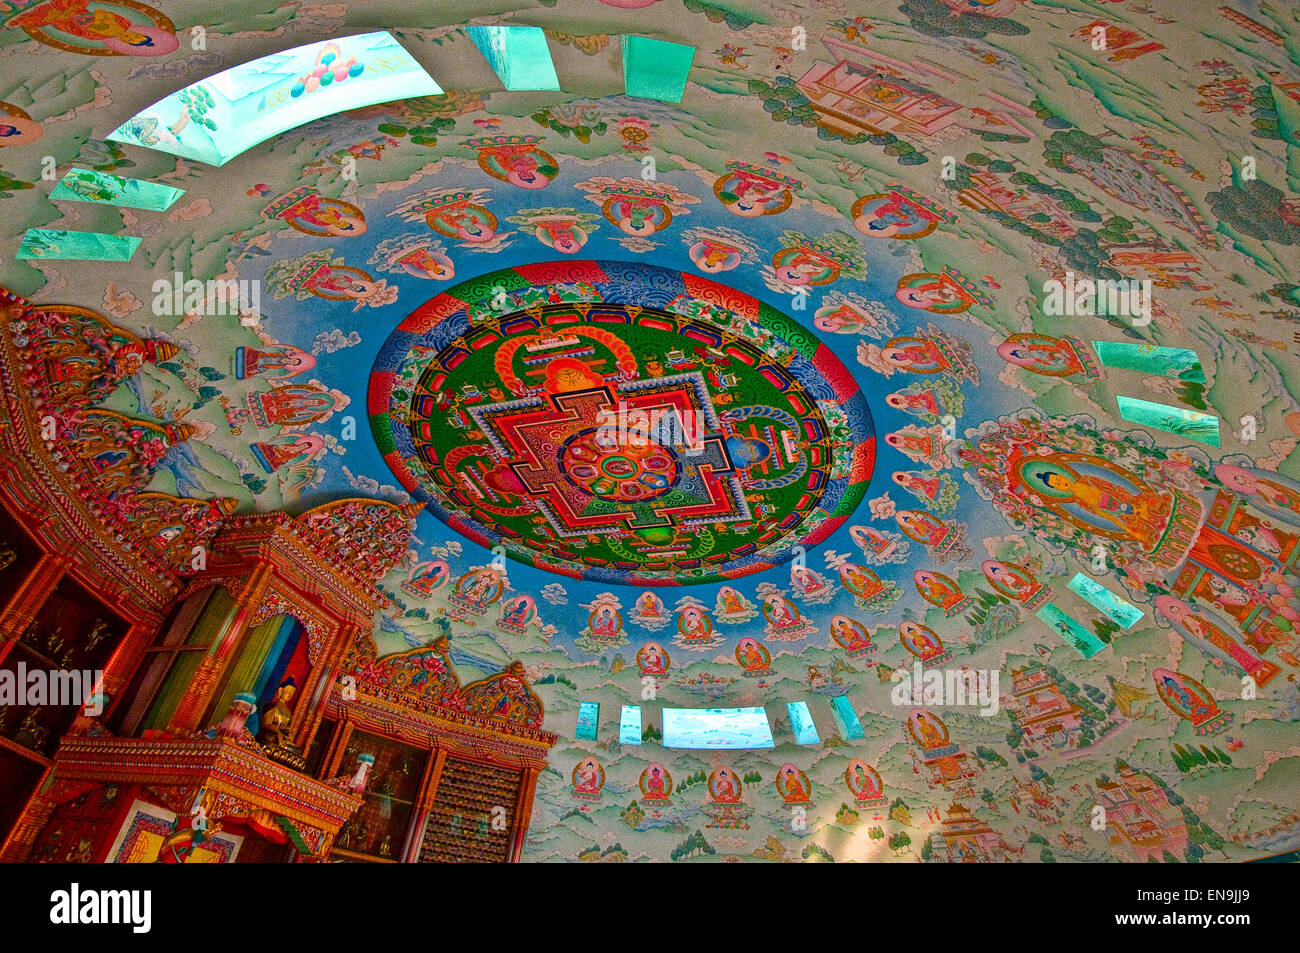 There are very beautiful paintings on the dome of the temple. Stock Photo